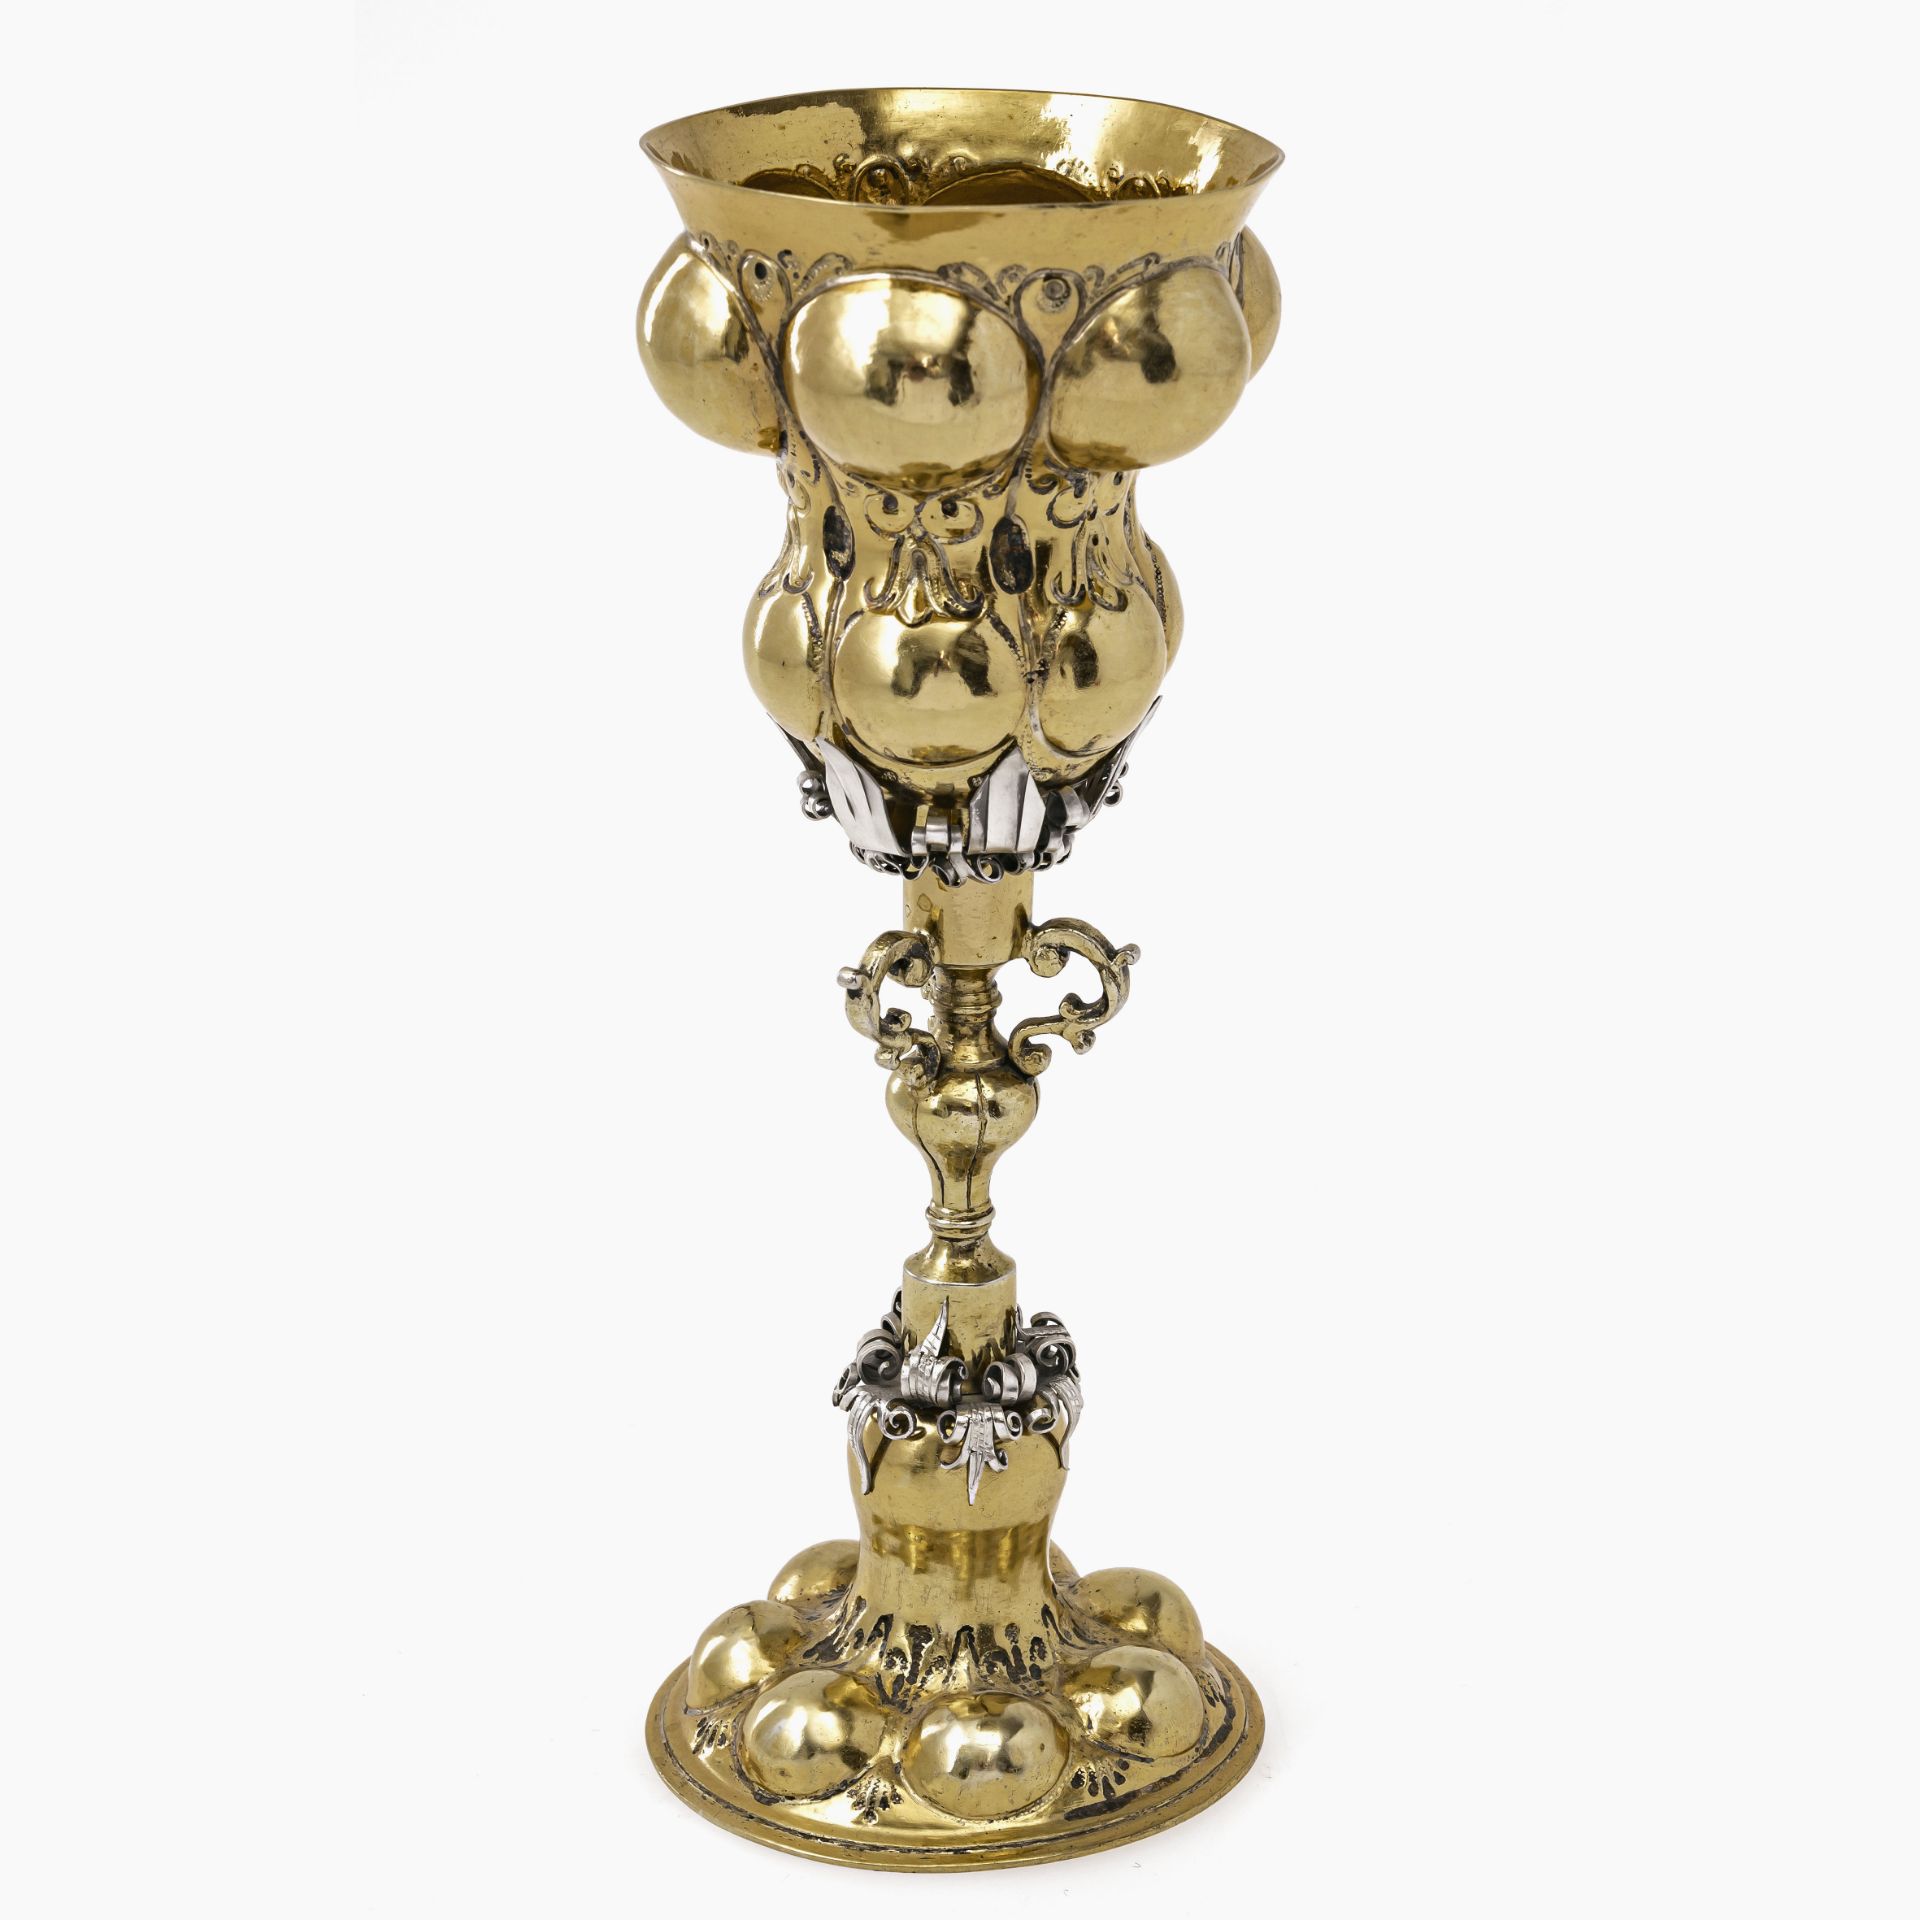 A small goblet with bosses - Nuremberg, circa 1640/1650, Lorenz Kabes